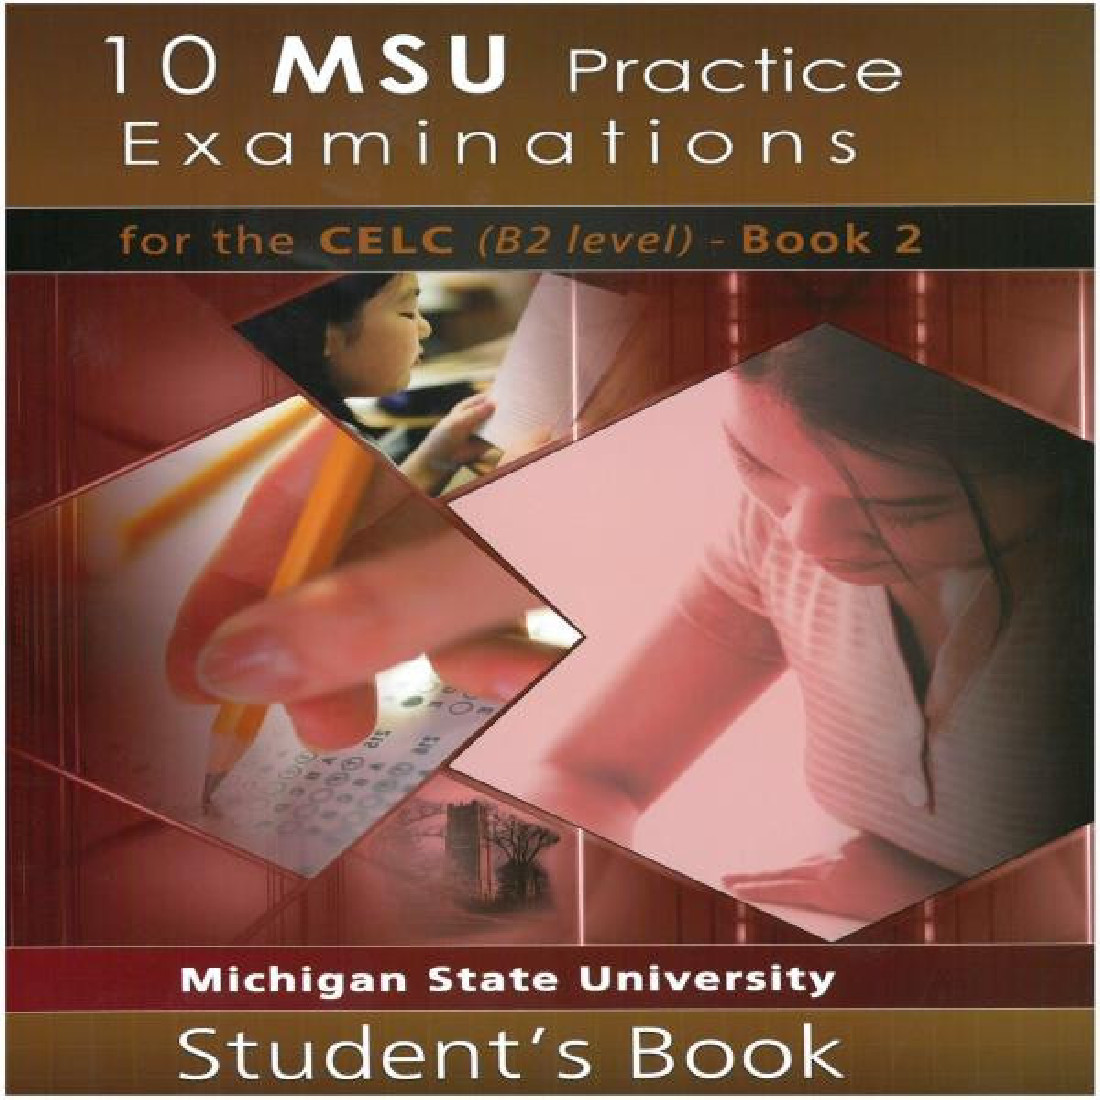 10 MSU PRACTICE EXAMINATIONS FOR THE CELC B2 BOOK 2STUDENTS BOOK